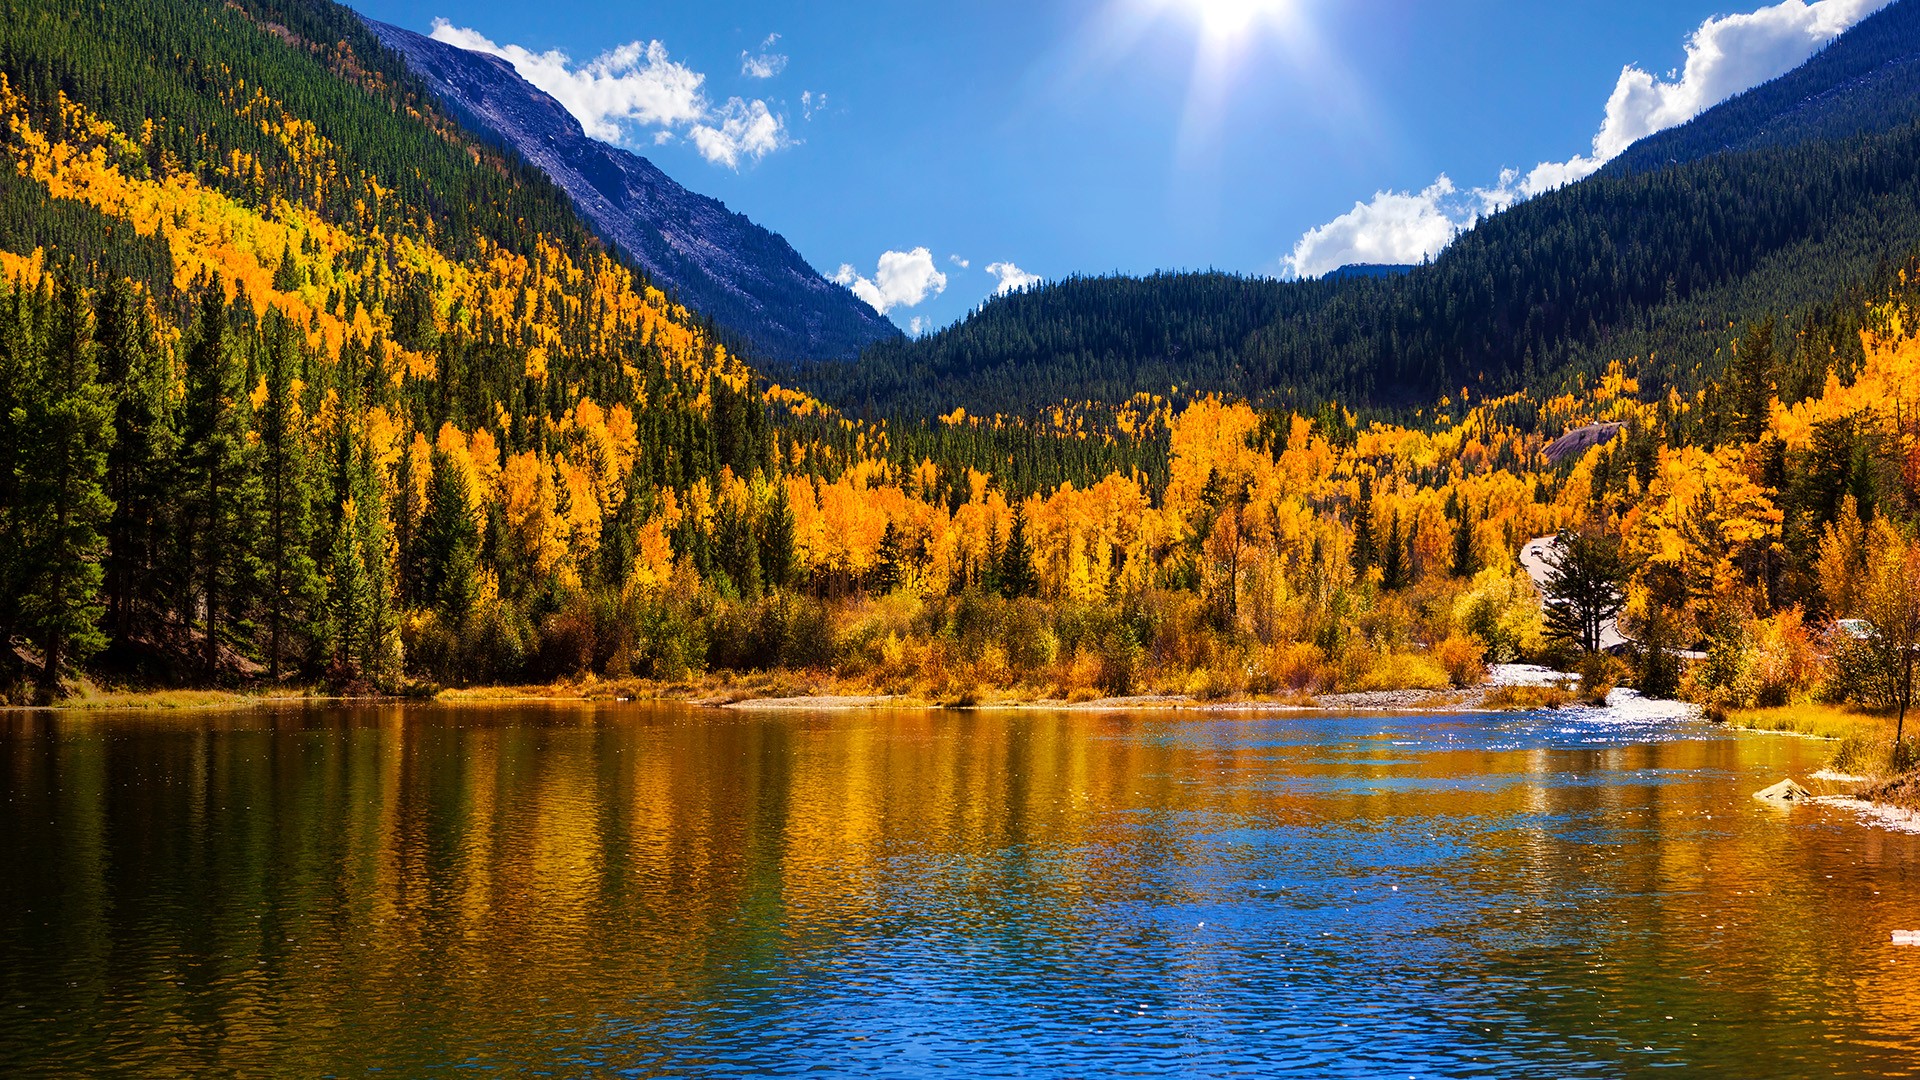 Reservoir in autumn, Arapaho National Forest, Colorado, USA